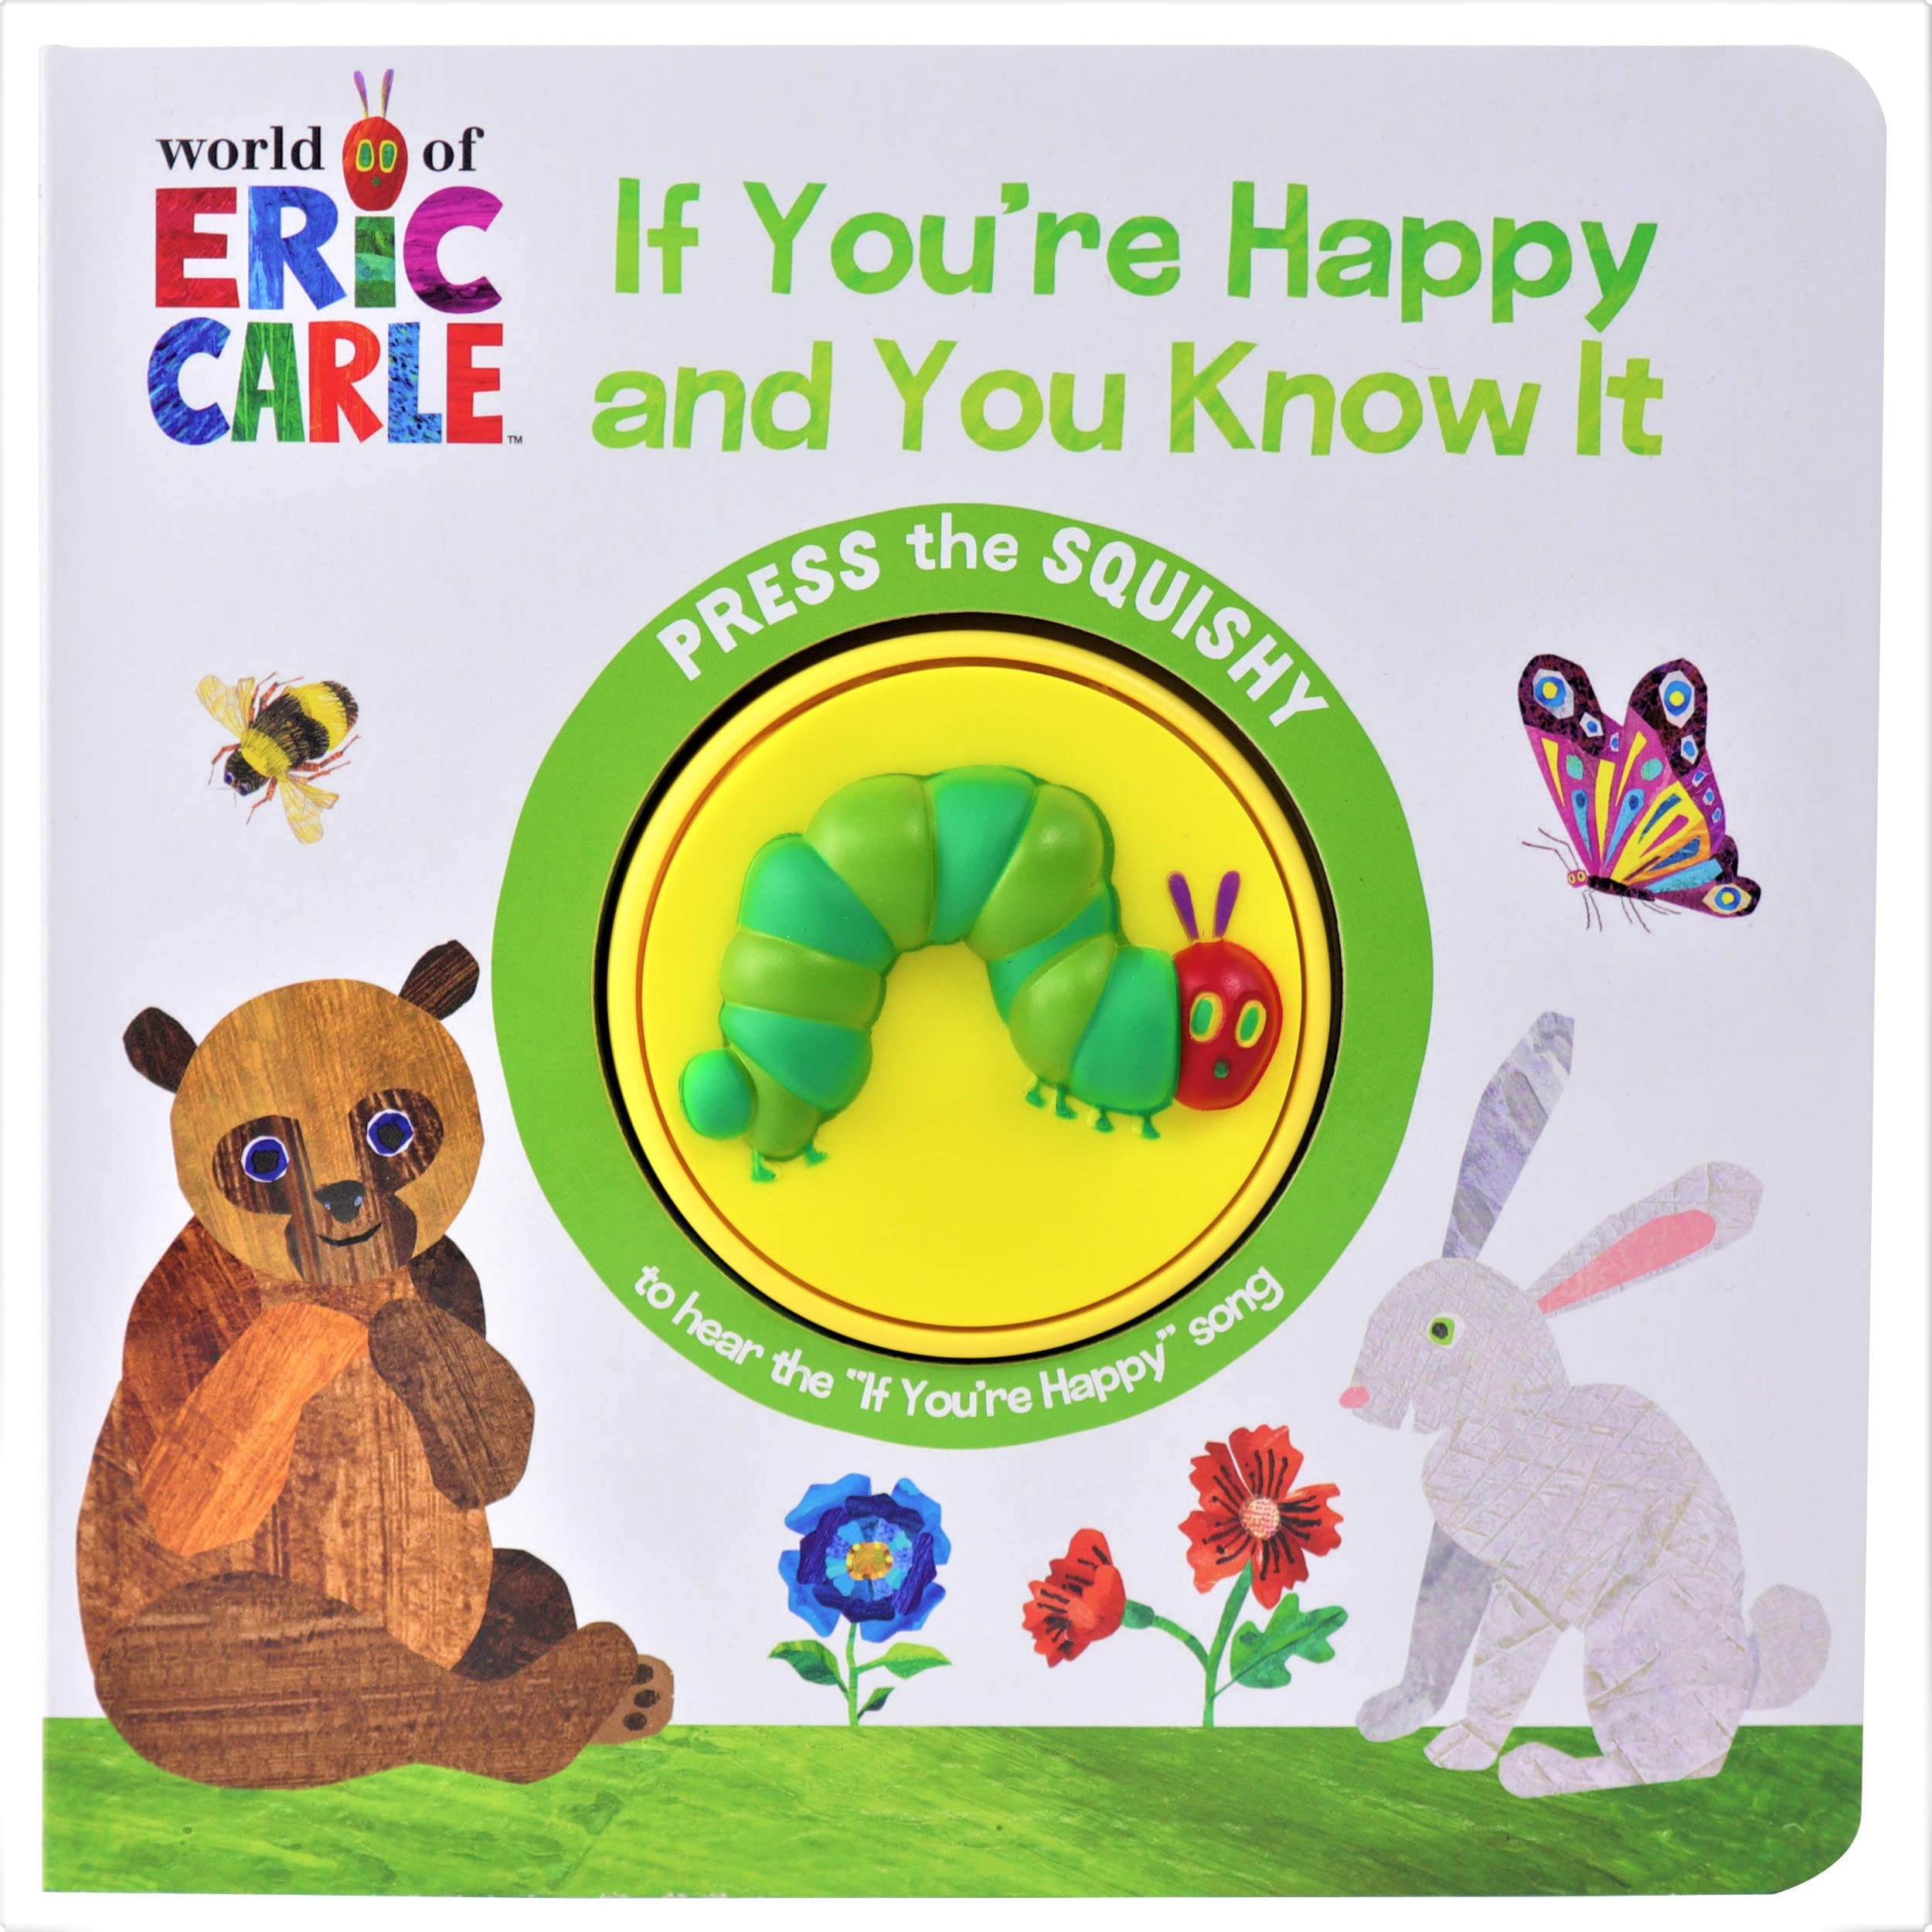 World of Eric Carle- If You're Happy and You Know It